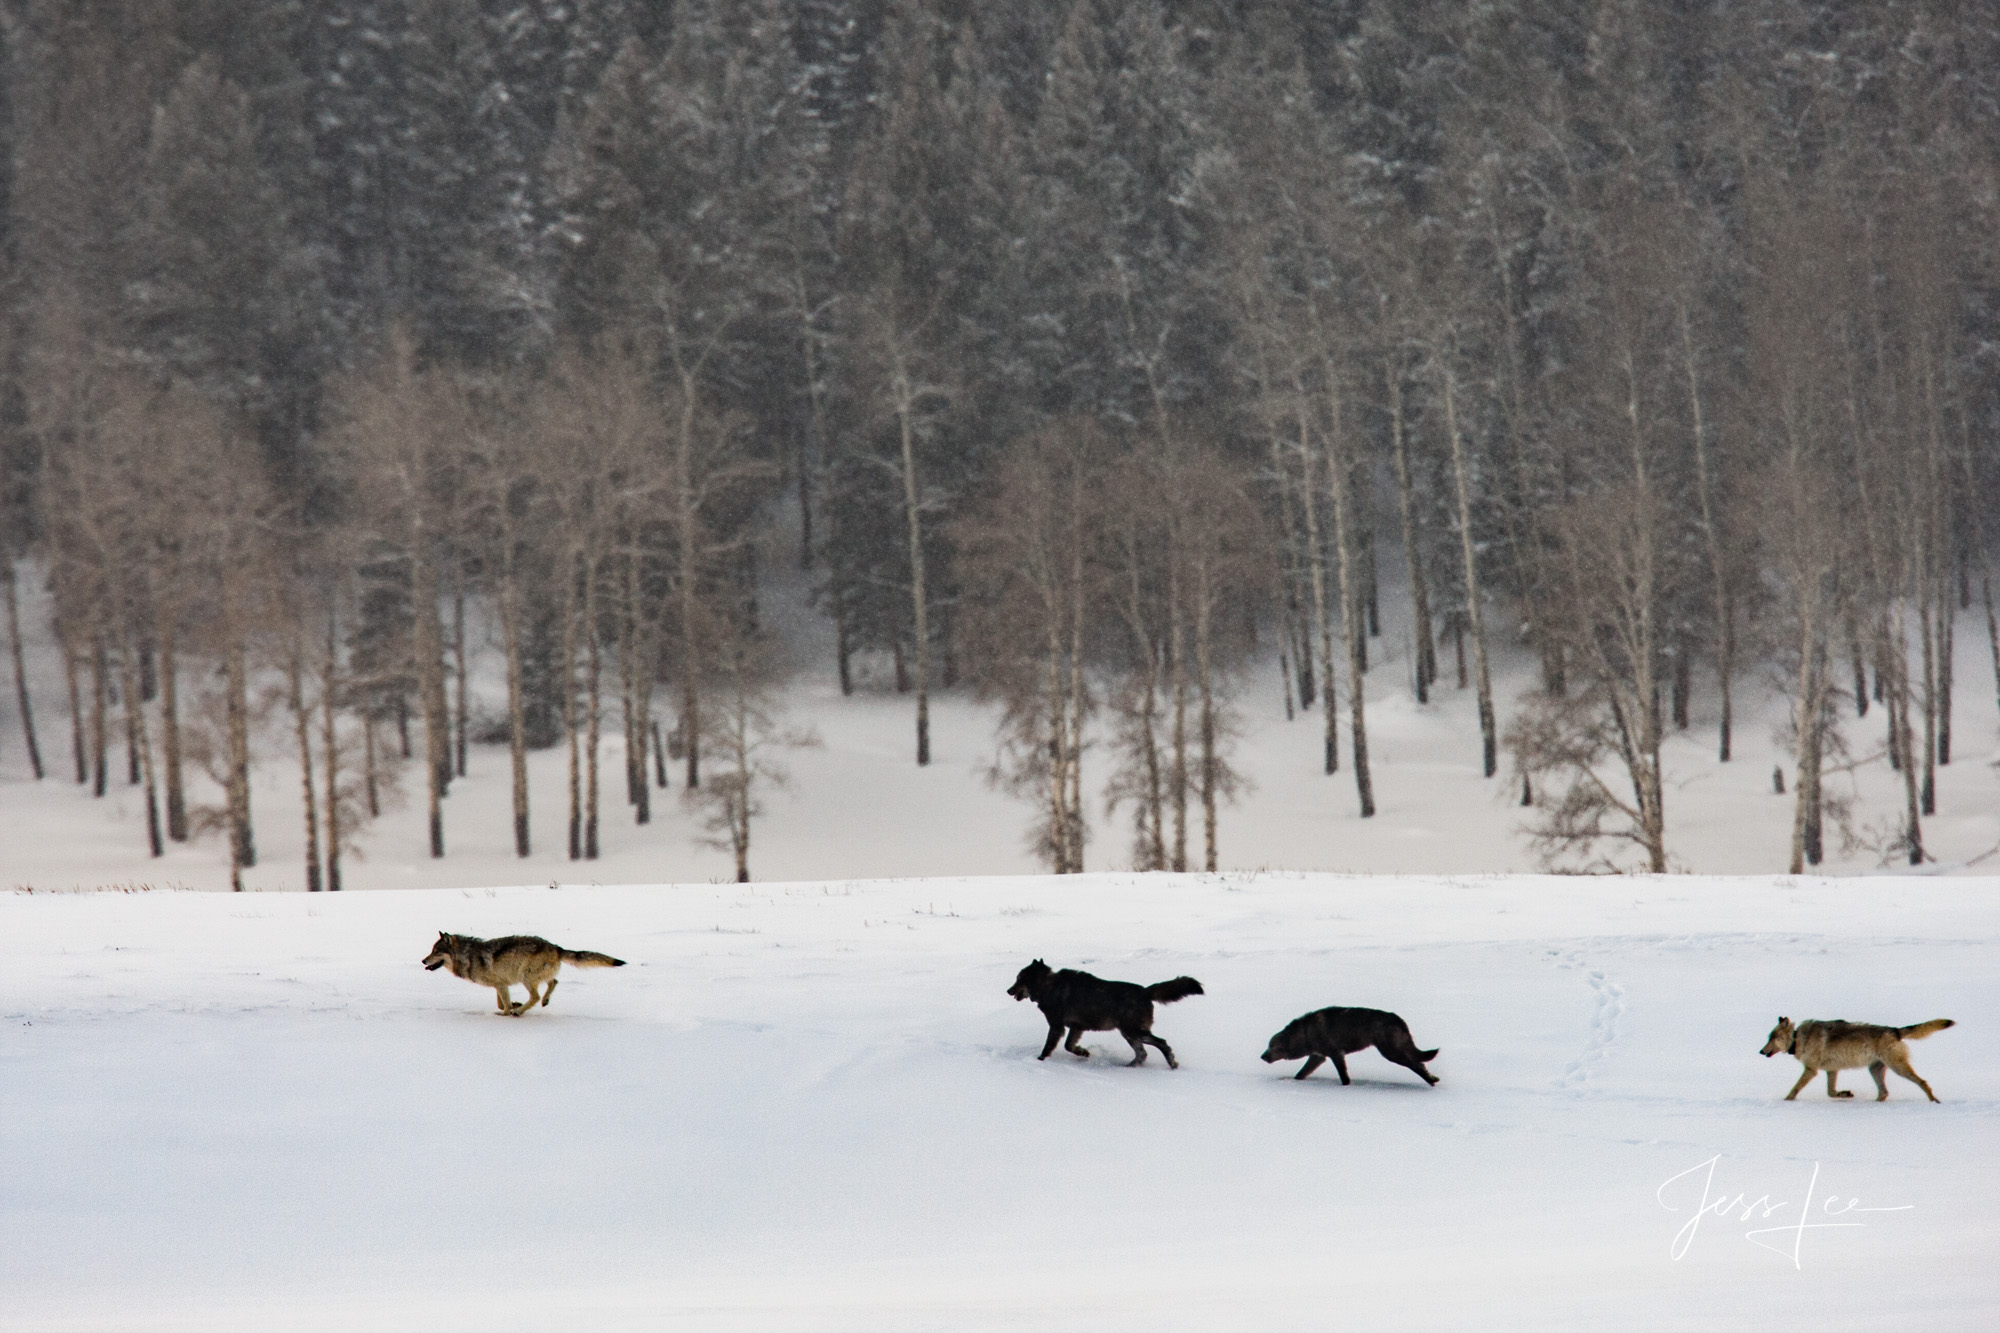 Wolves hunting in snow picture in the Wild.  Exclusive limited edition photo of 200 prints by Jess Lee